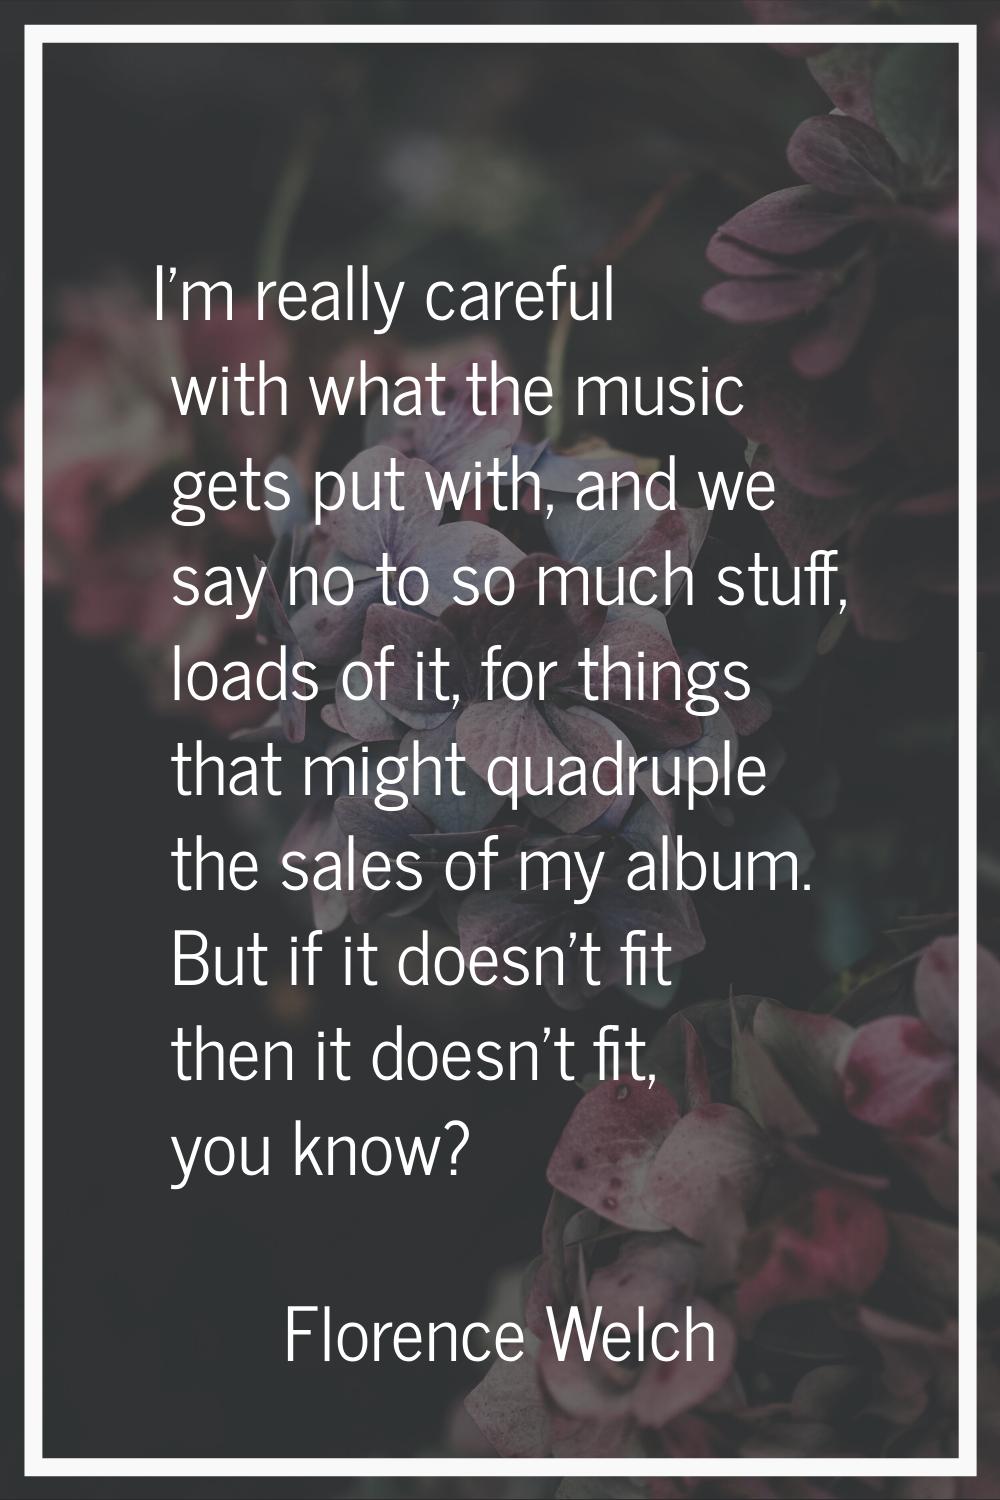 I'm really careful with what the music gets put with, and we say no to so much stuff, loads of it, 